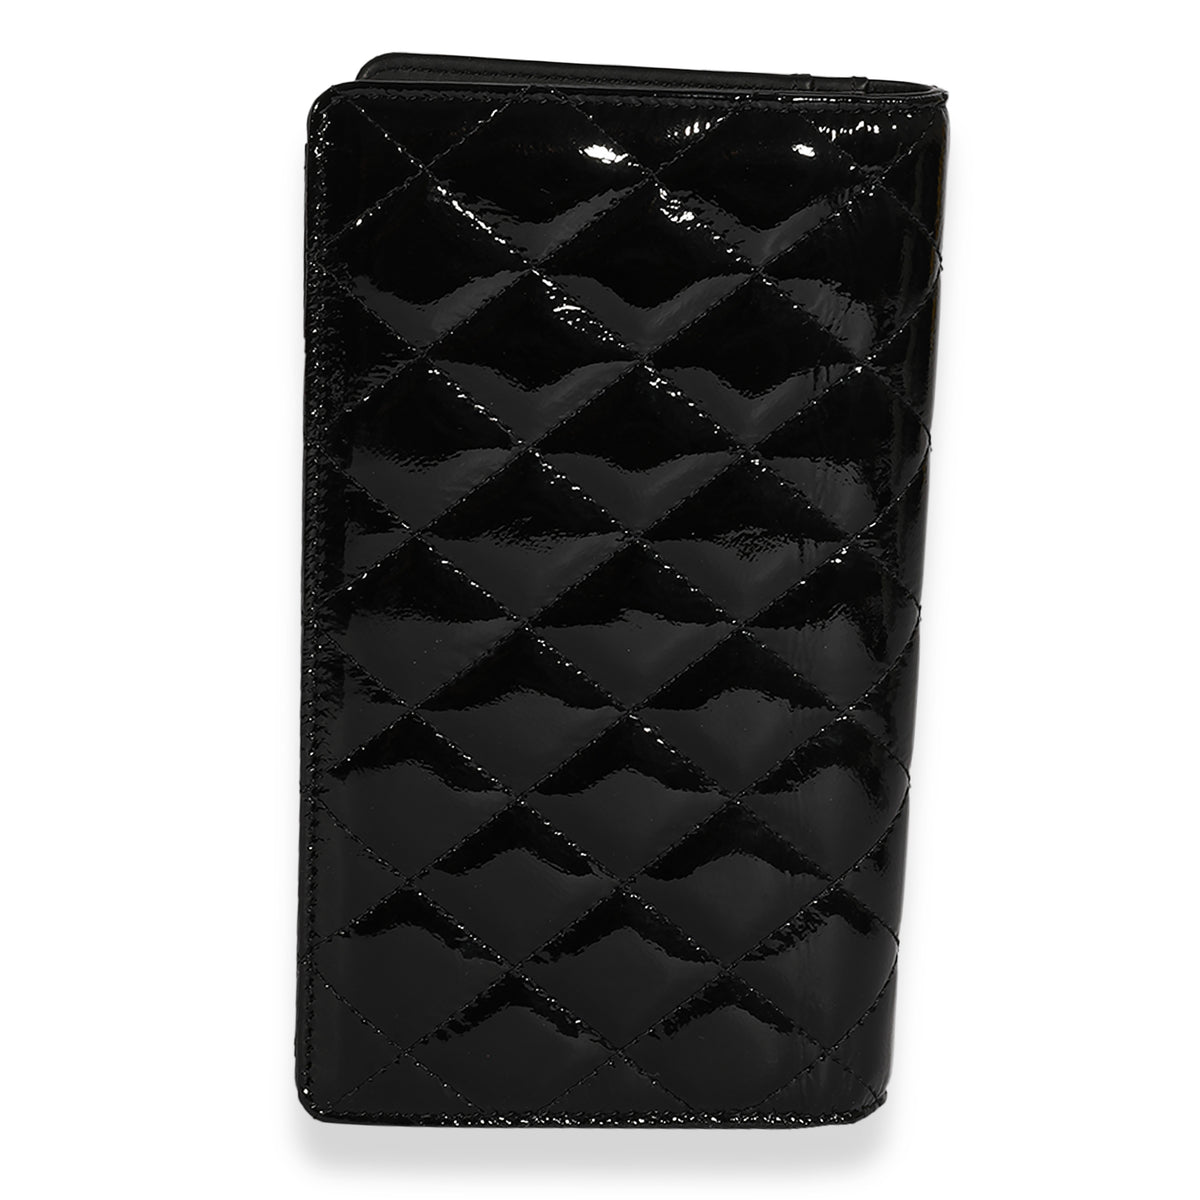 Black Quilted Patent Leather Yen Wallet